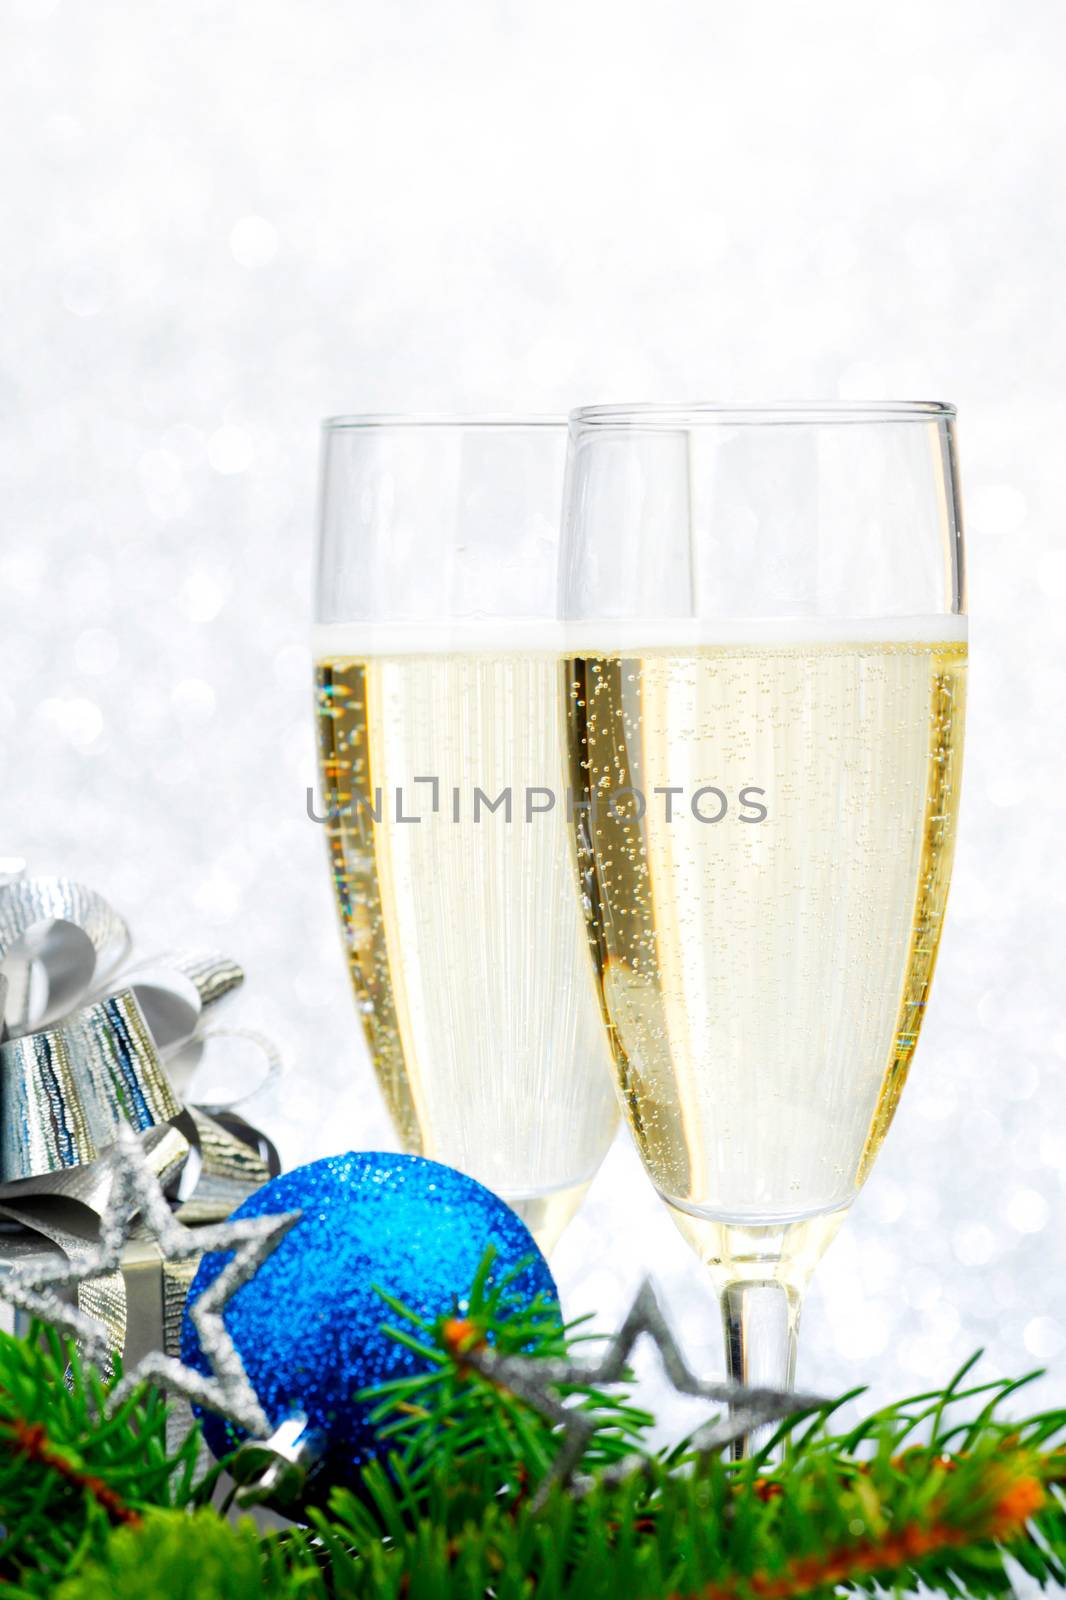 Champagneand christmas decor by Yellowj